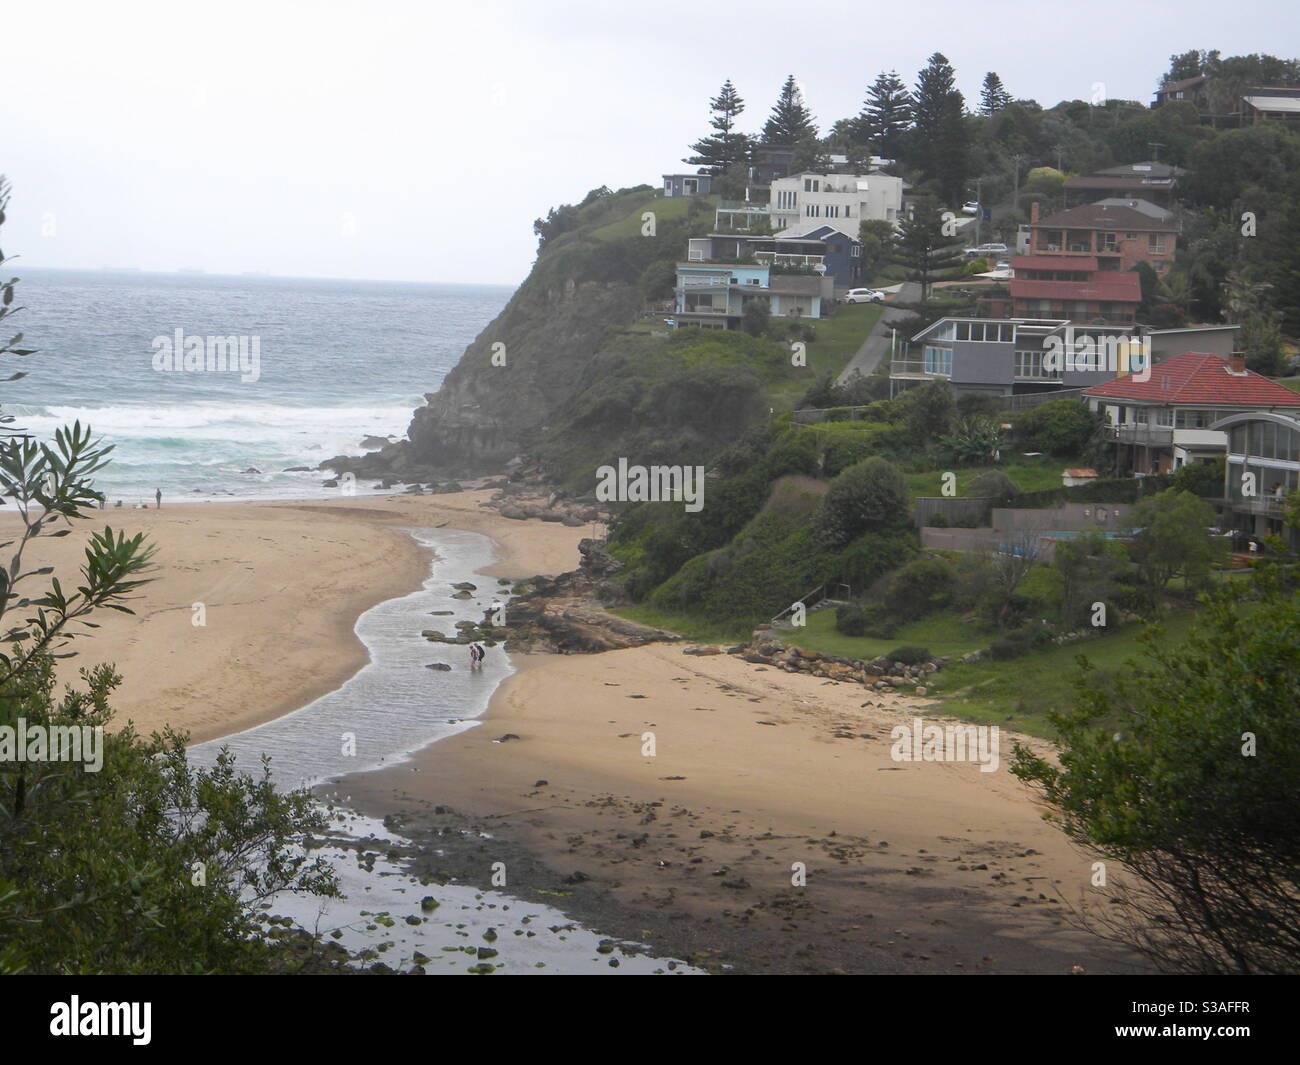 Residential homes overlooking the beach at Stanwell Park NSW Australia Stock Photo